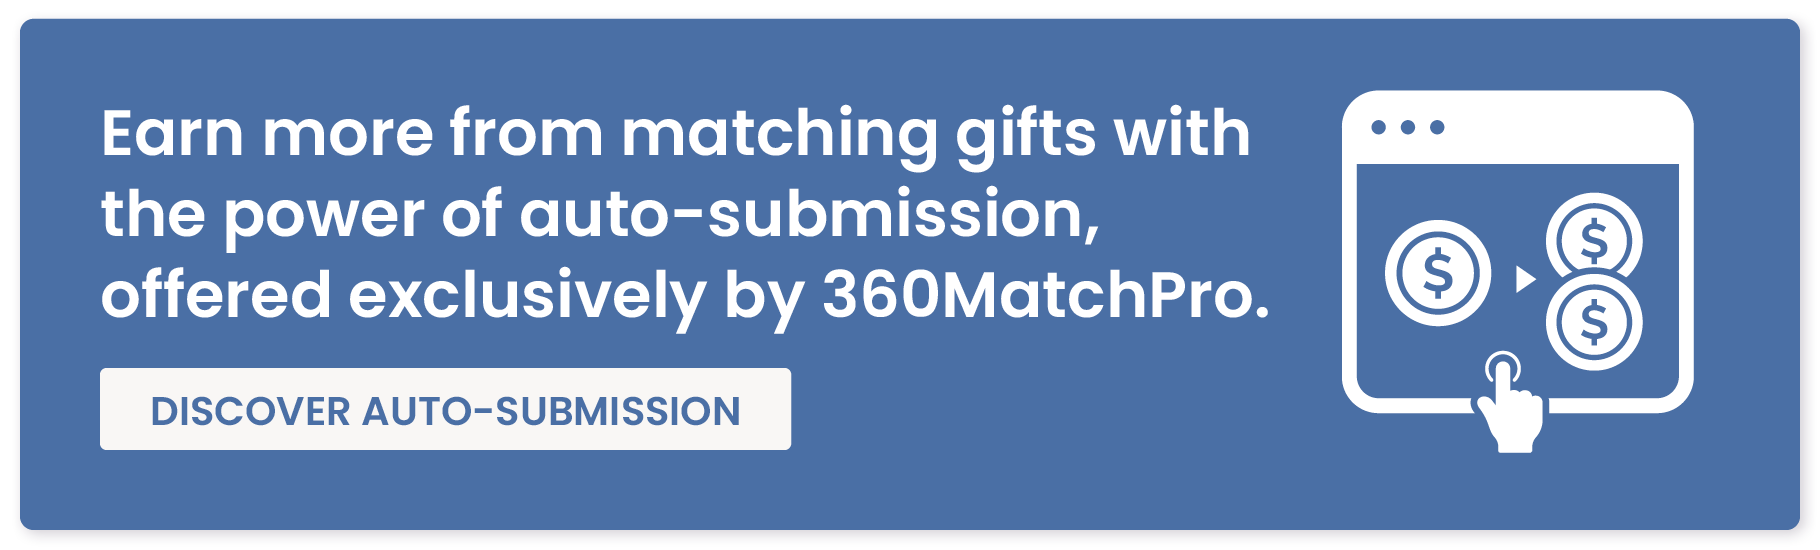 Earn more from matching gifts with the power of auto-submission, offered exclusively by 360MatchPro. Discover auto-submission. 